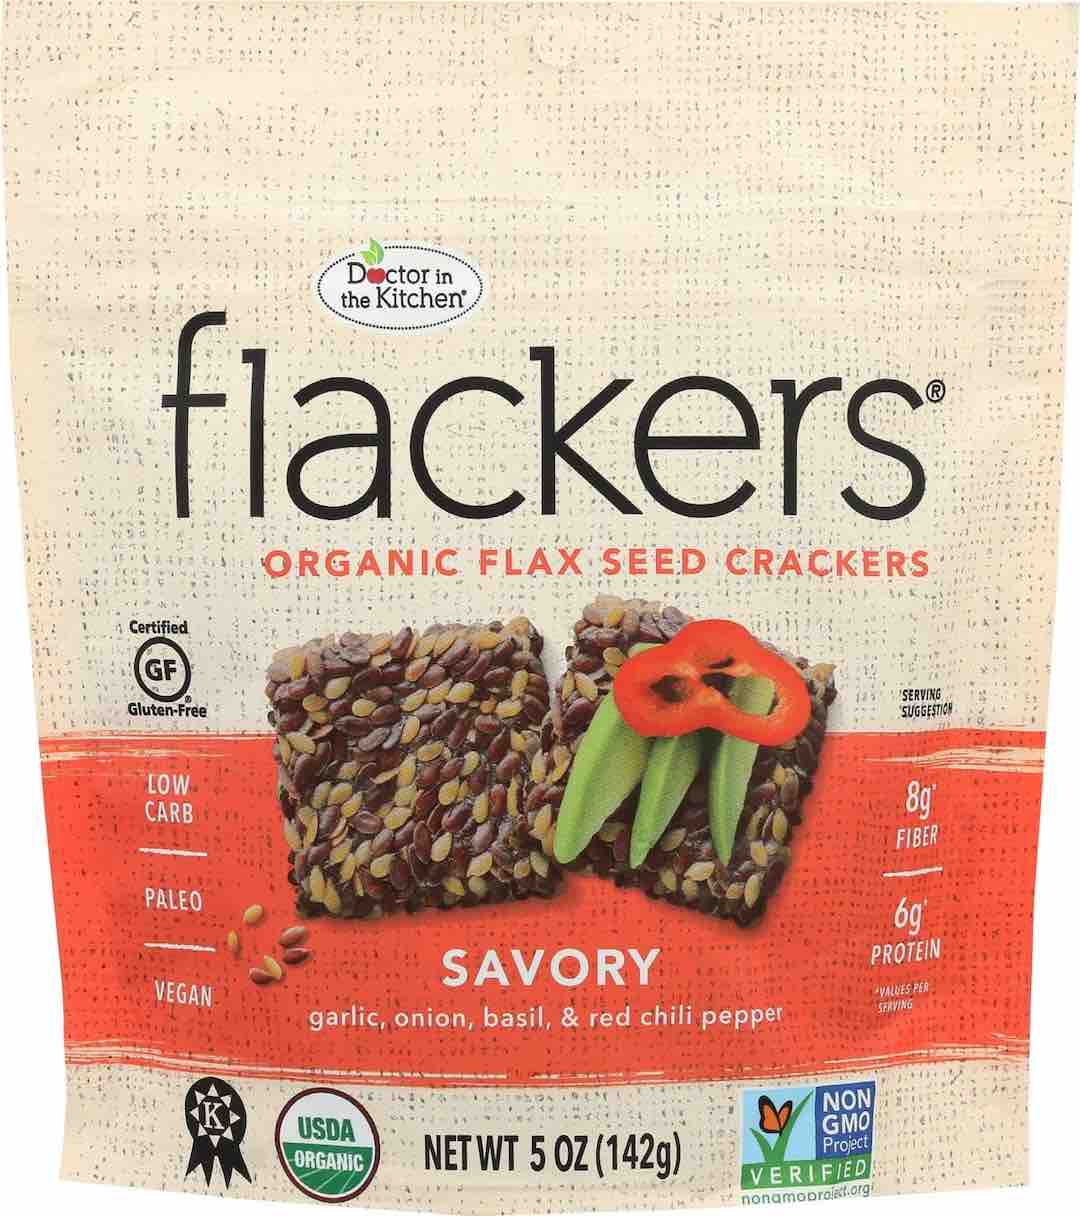 Doctor In The Kitchen, Flackers Organic Flax Seed Crackers